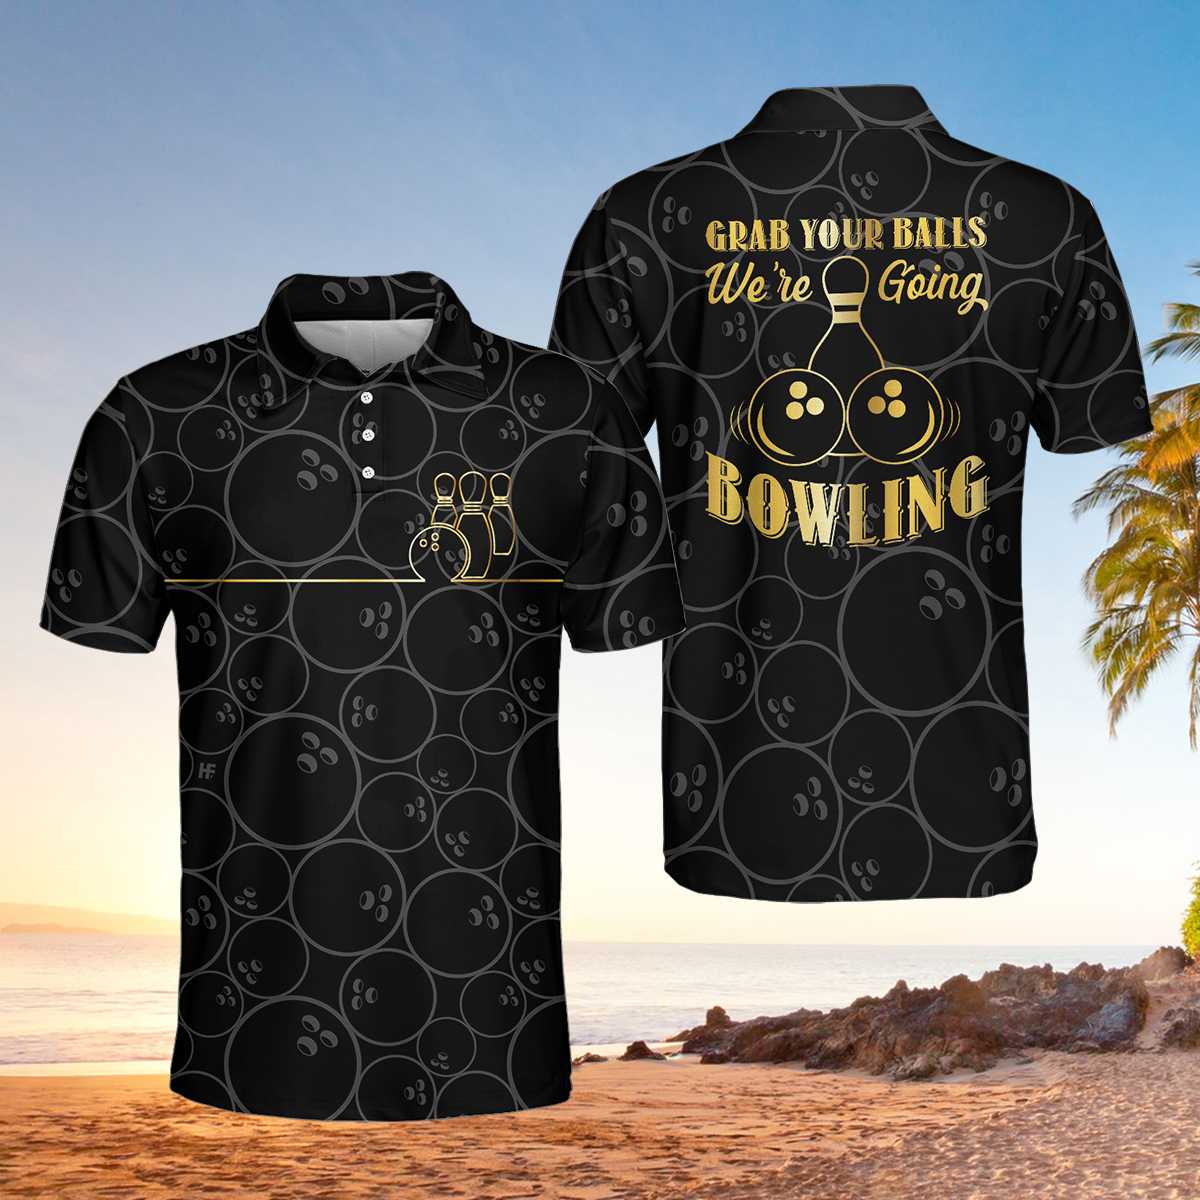 Grab Your Ball We''Re Going Bowling Polo Shirt/ Bowling Ball Pattern Polo Shirt/ Black Bowling Shirt For Men Coolspod